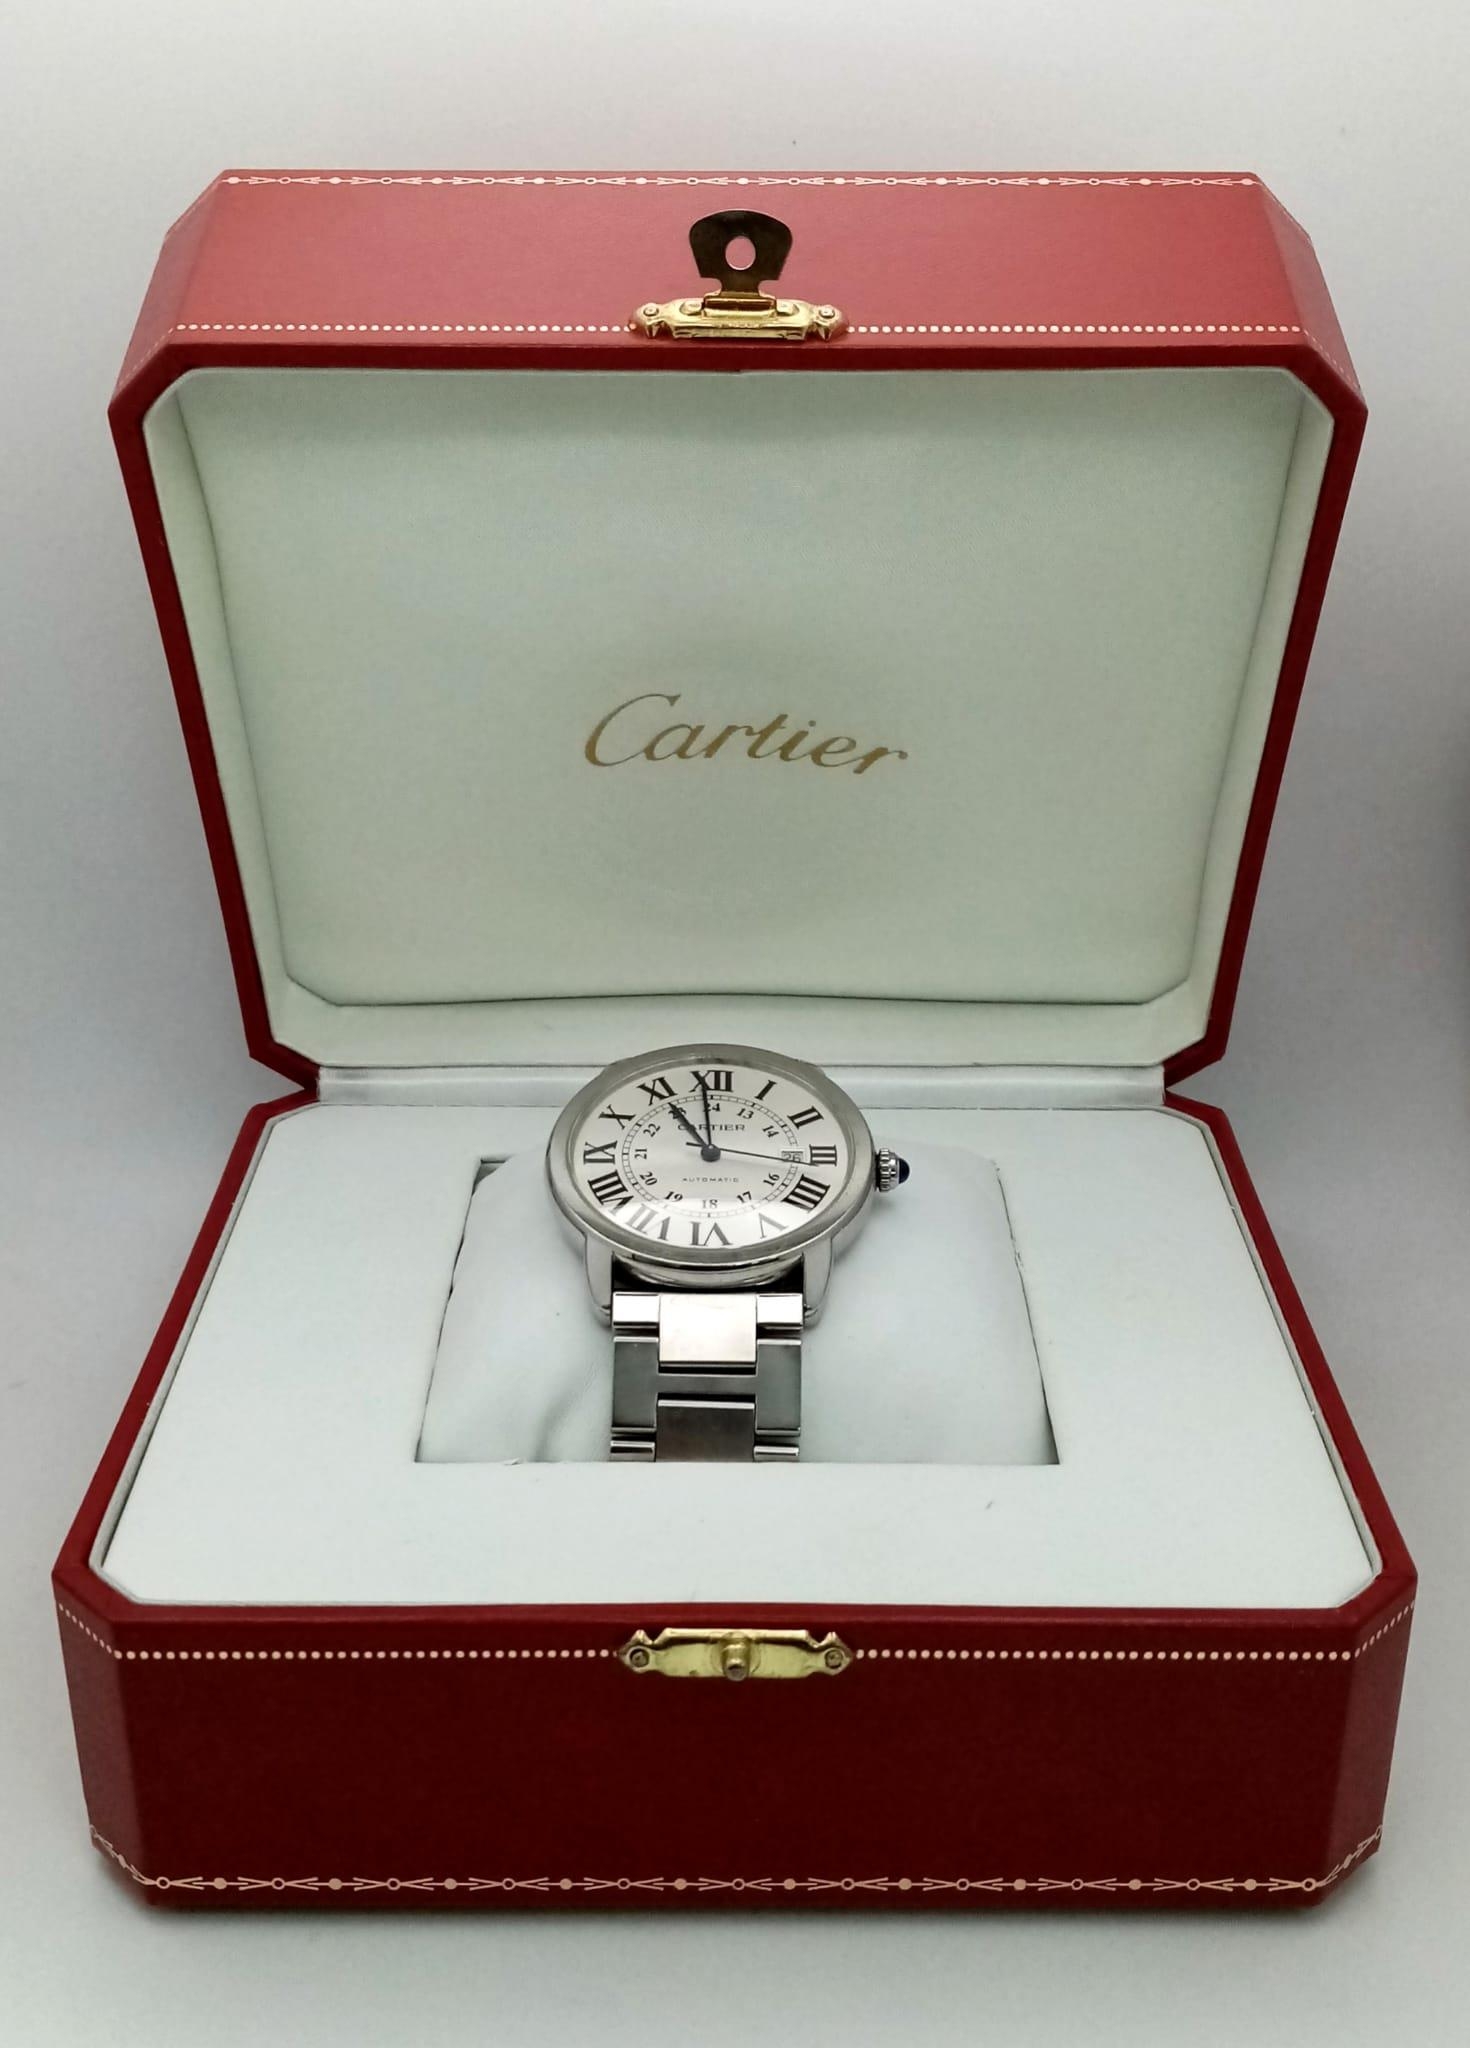 A CARTIER STAINLESS STEEL GENTS AUTOMATIC "RONDE SOLO" WATCH WITH BOX AND PAPERS 42mm 14808 - Image 7 of 10